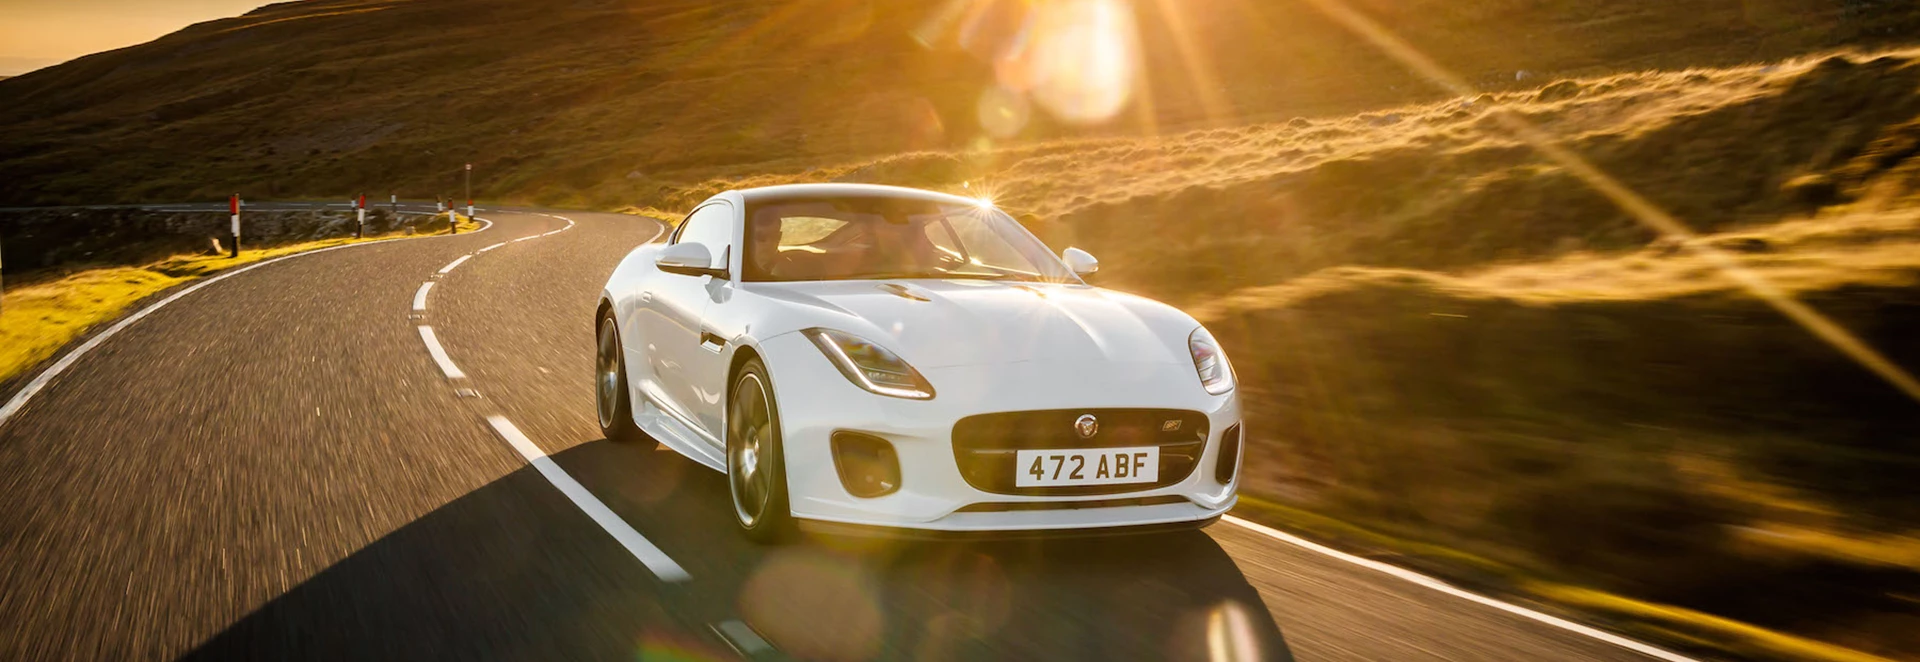 Jaguar F-Type Chequered Flag Edition 2019 Review 